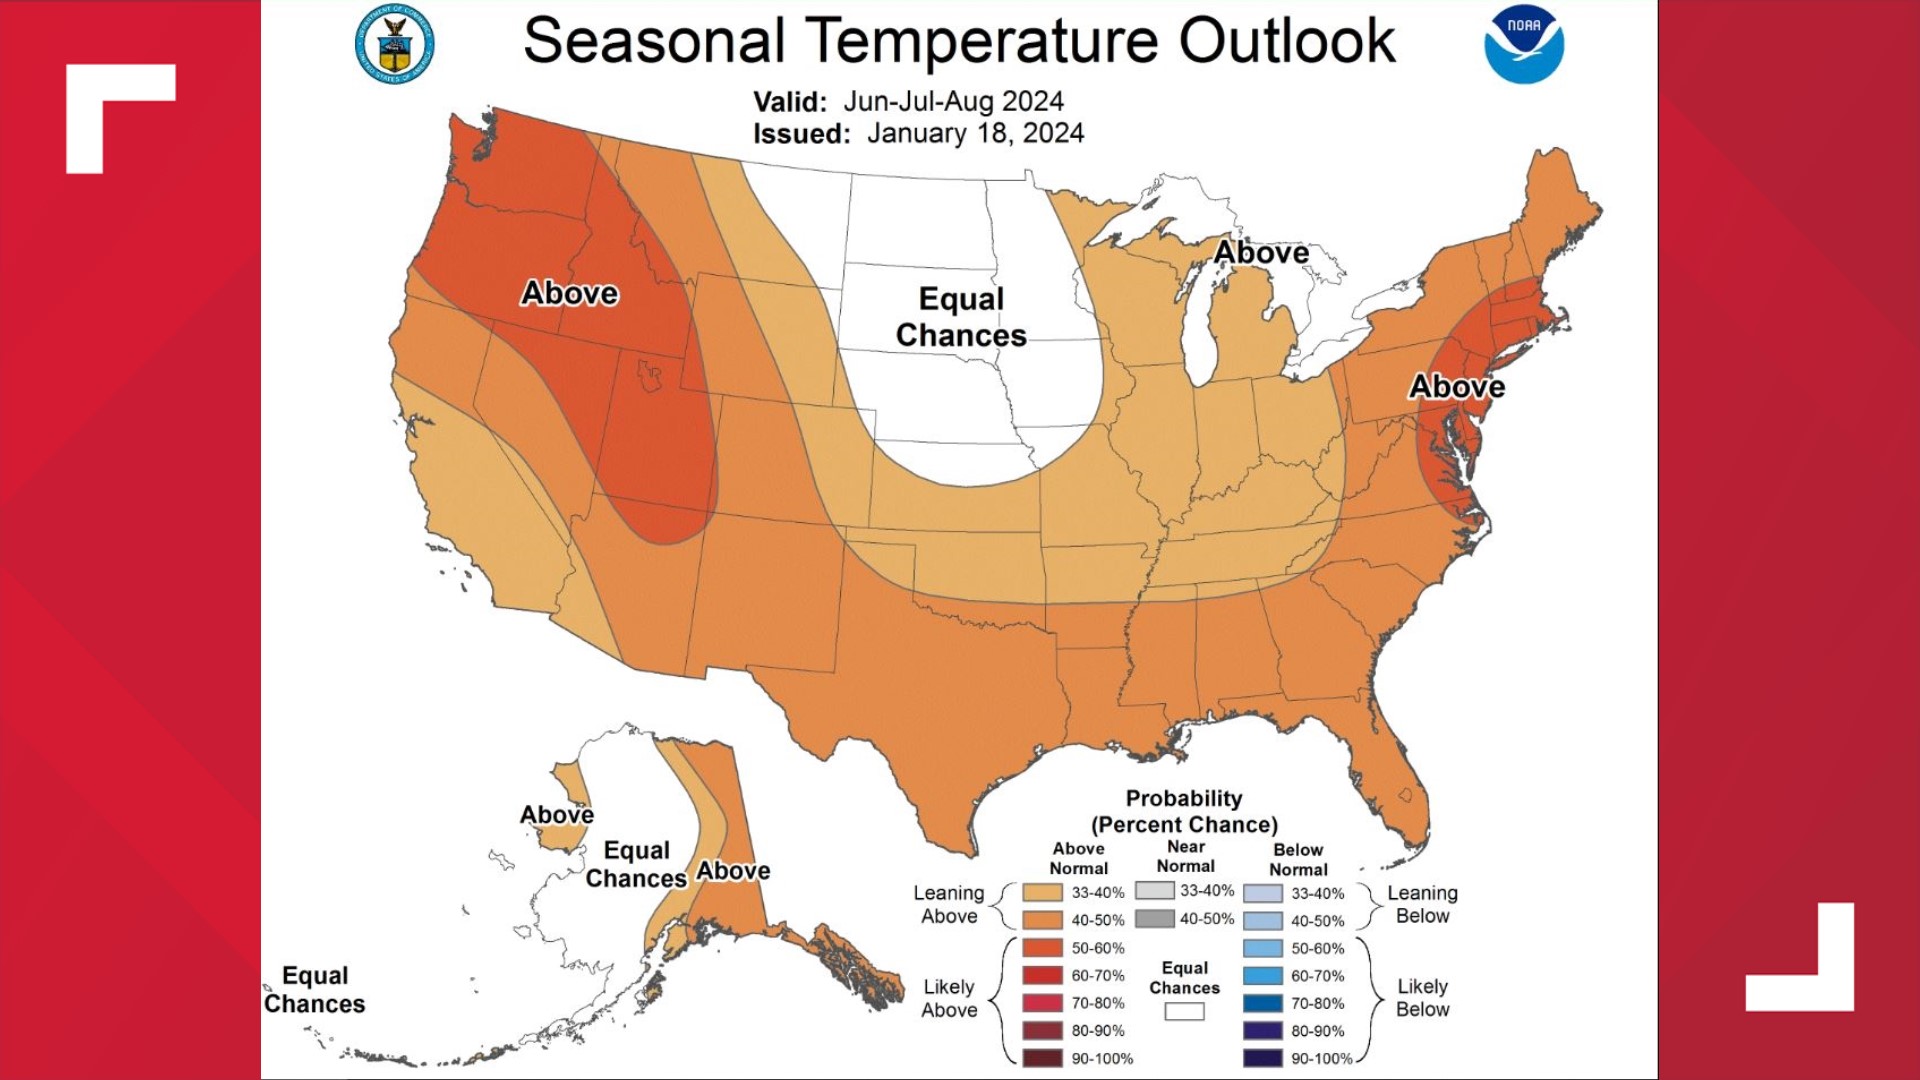 We're expecting a hot summer across Central Texas with a La Niña pattern forming